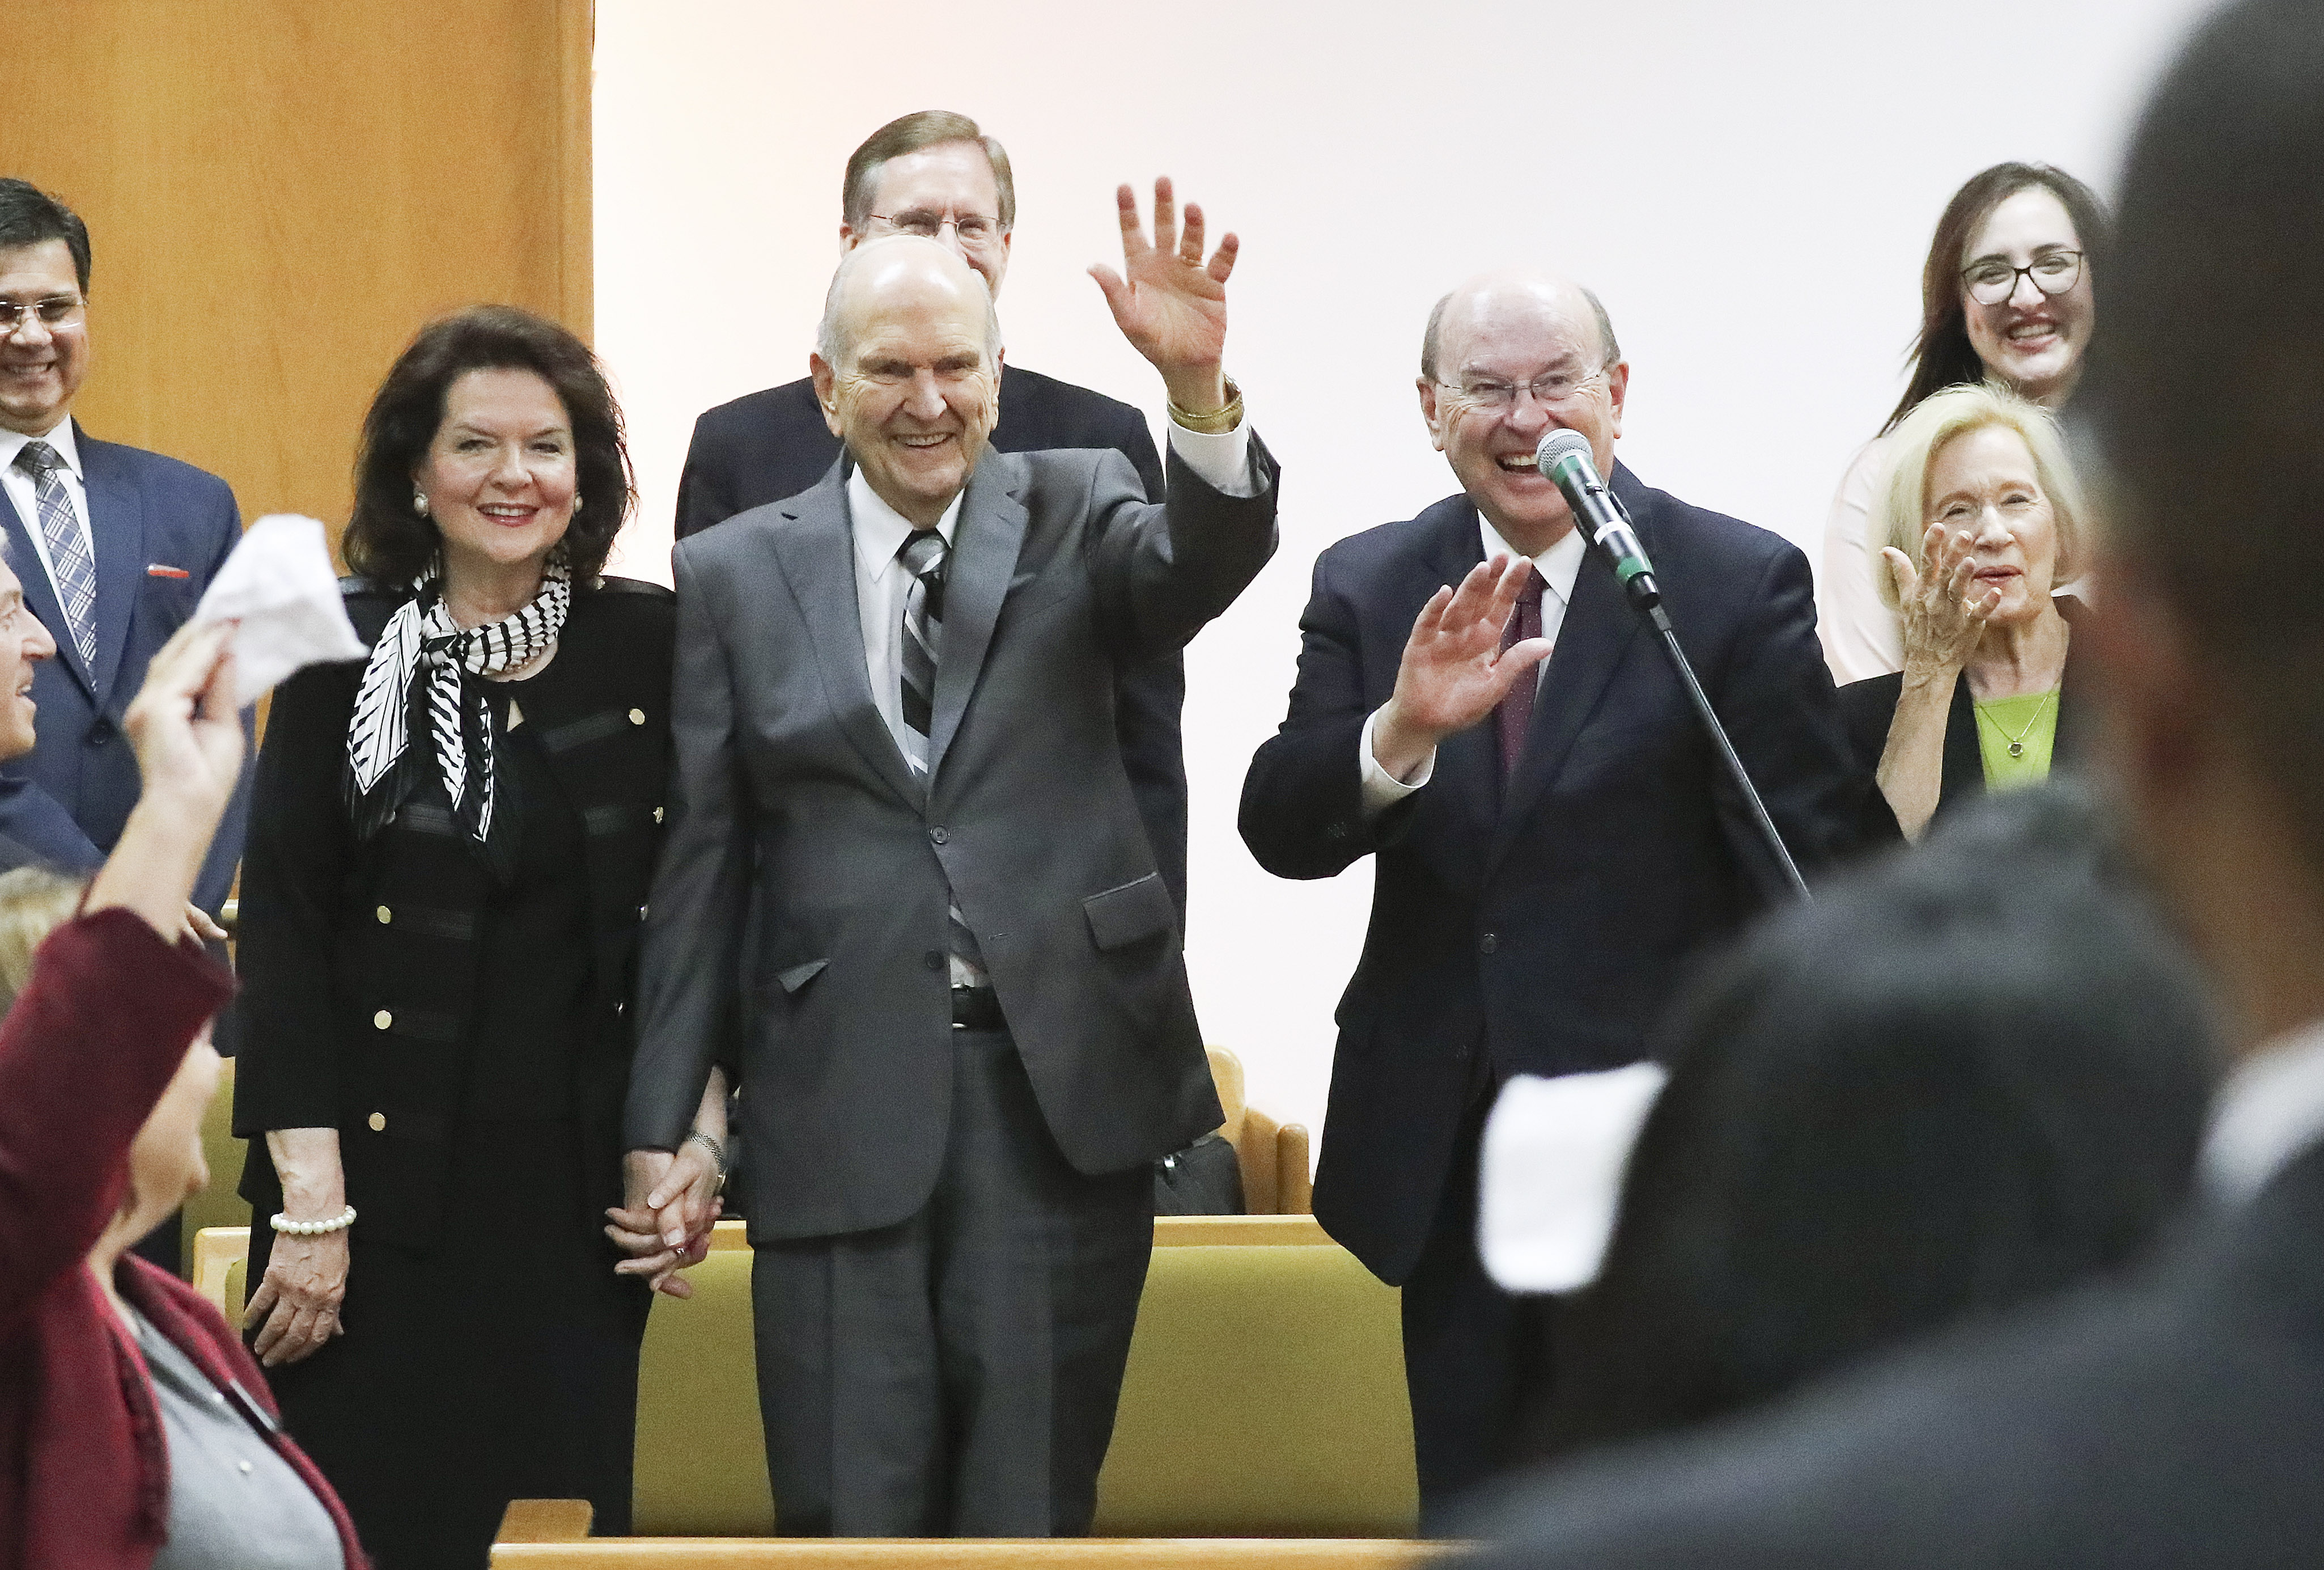 President Russell M. Nelson of The Church of Jesus Christ of Latter-day Saints and his wife, Sister Wendy Nelson, with Elder Quentin L. Cook, Quorum of the Twelve Apostles, and his wife, Sister Mary Cook wave to missionaries after speaking during a Brazil Brasilia Mission meeting in Brasilia, Brazil, on Friday, Aug. 30, 2019.